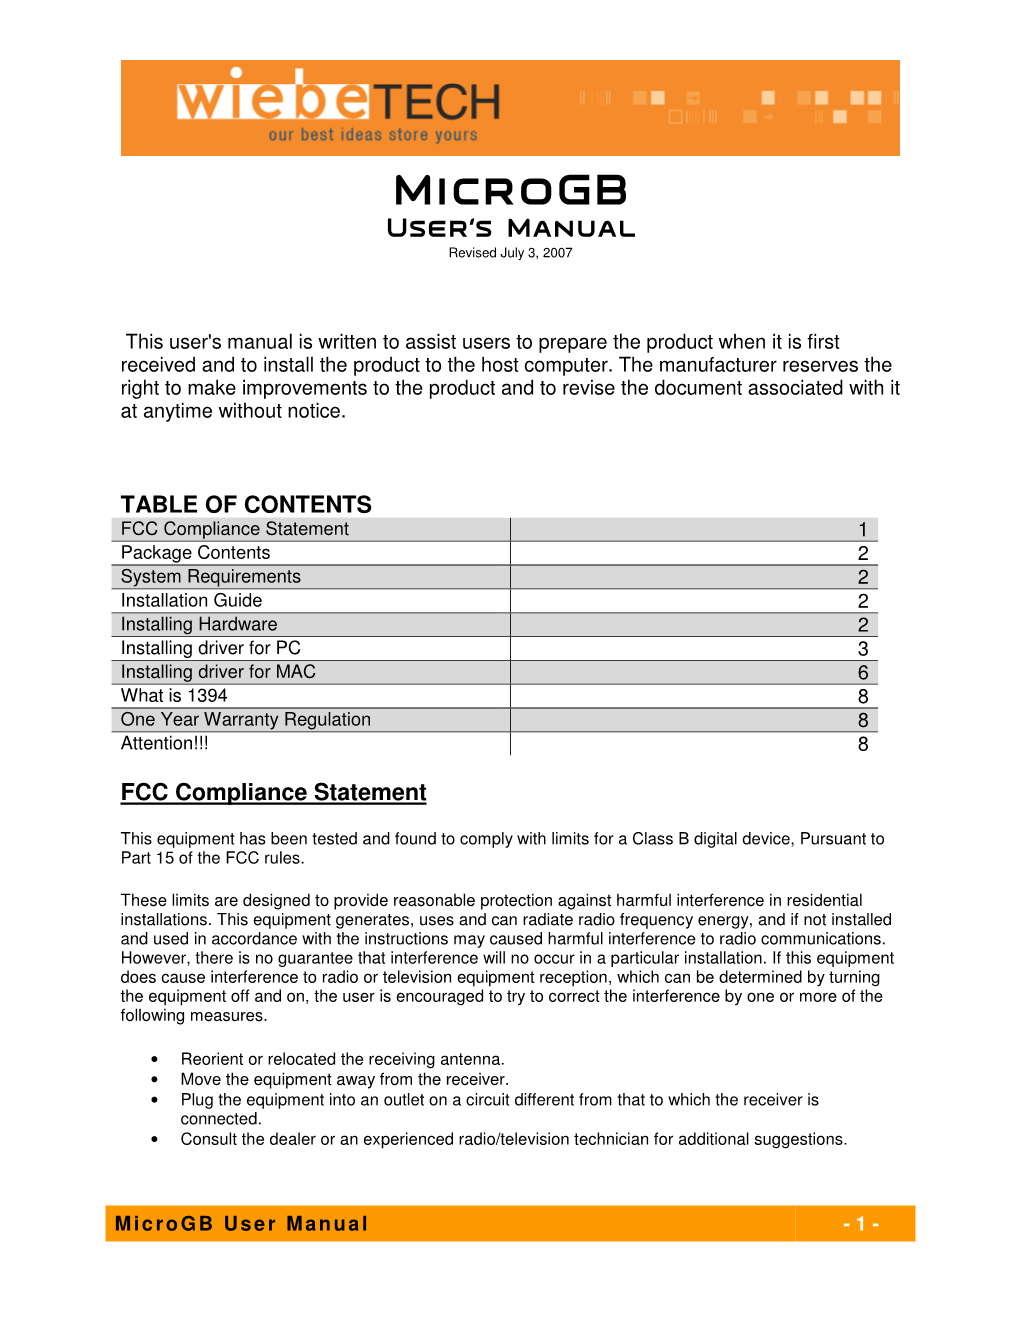 Microgb User’S Manual Revised July 3, 2007